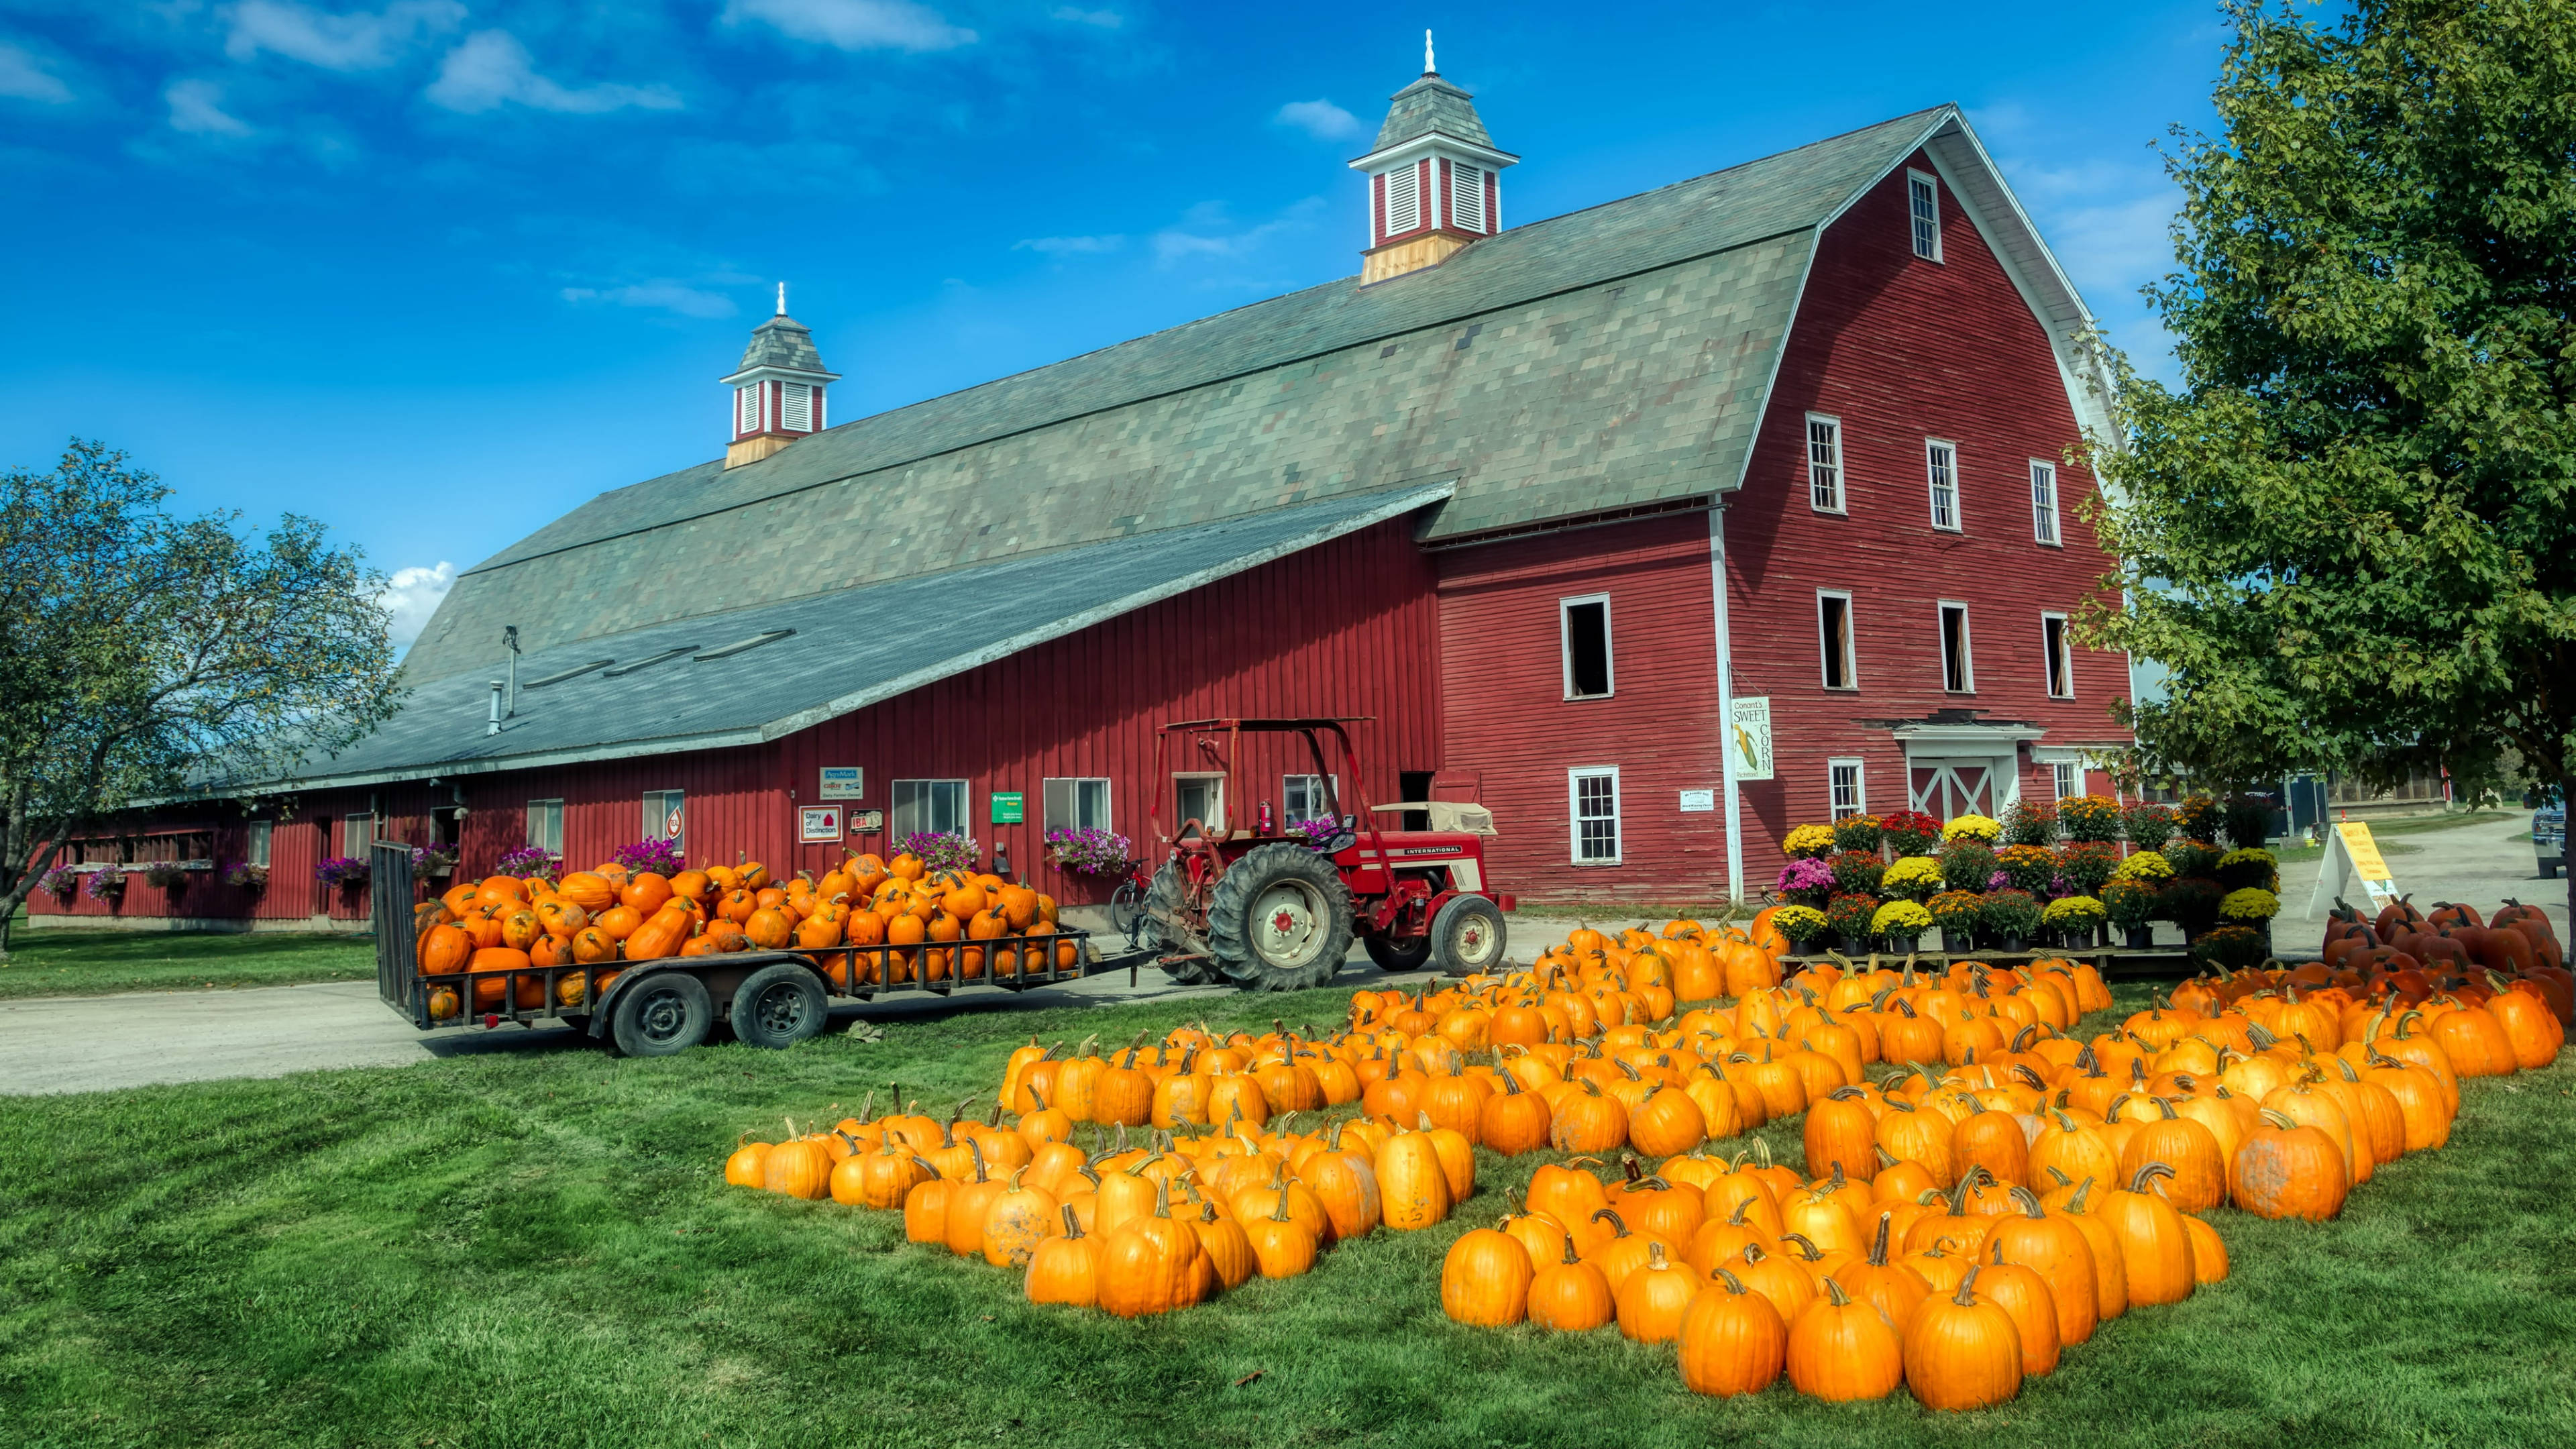 3840x2160 Download Vermont Red Barn And Pumpkins Wallpaper